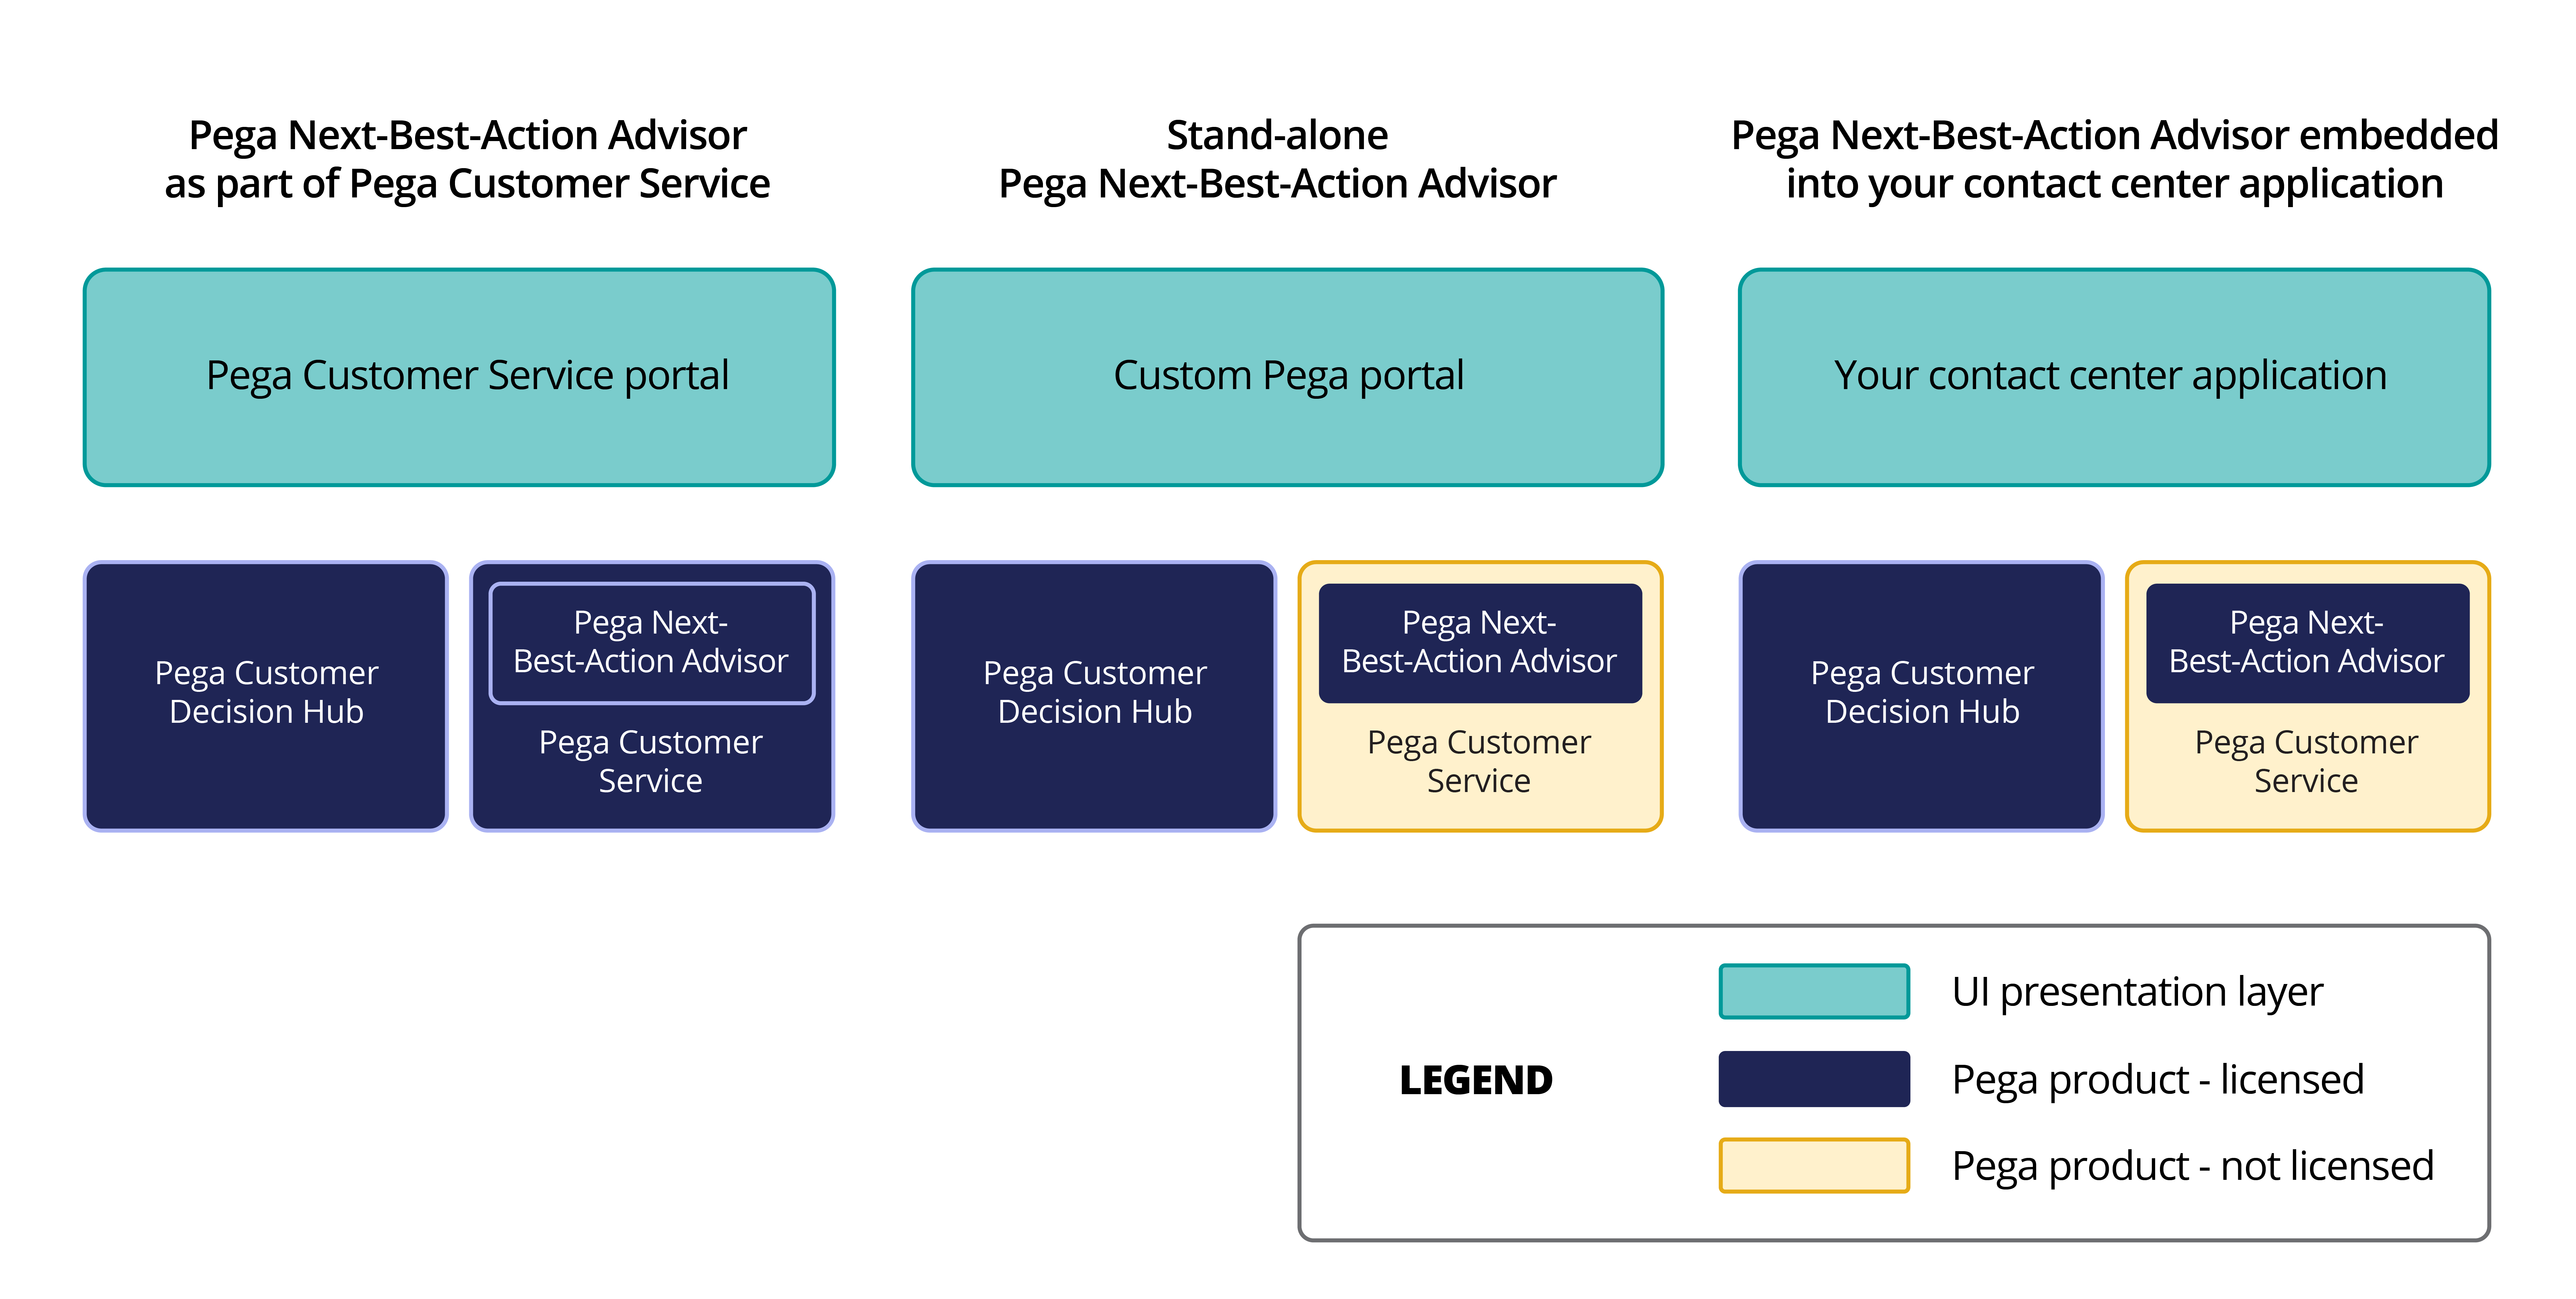 A block diagram showing how pega next best action advisor is implemented in the
                    context of pega products and the pega ui presentation layer. Also, which pega
                    products are licensed and which do not require a license.